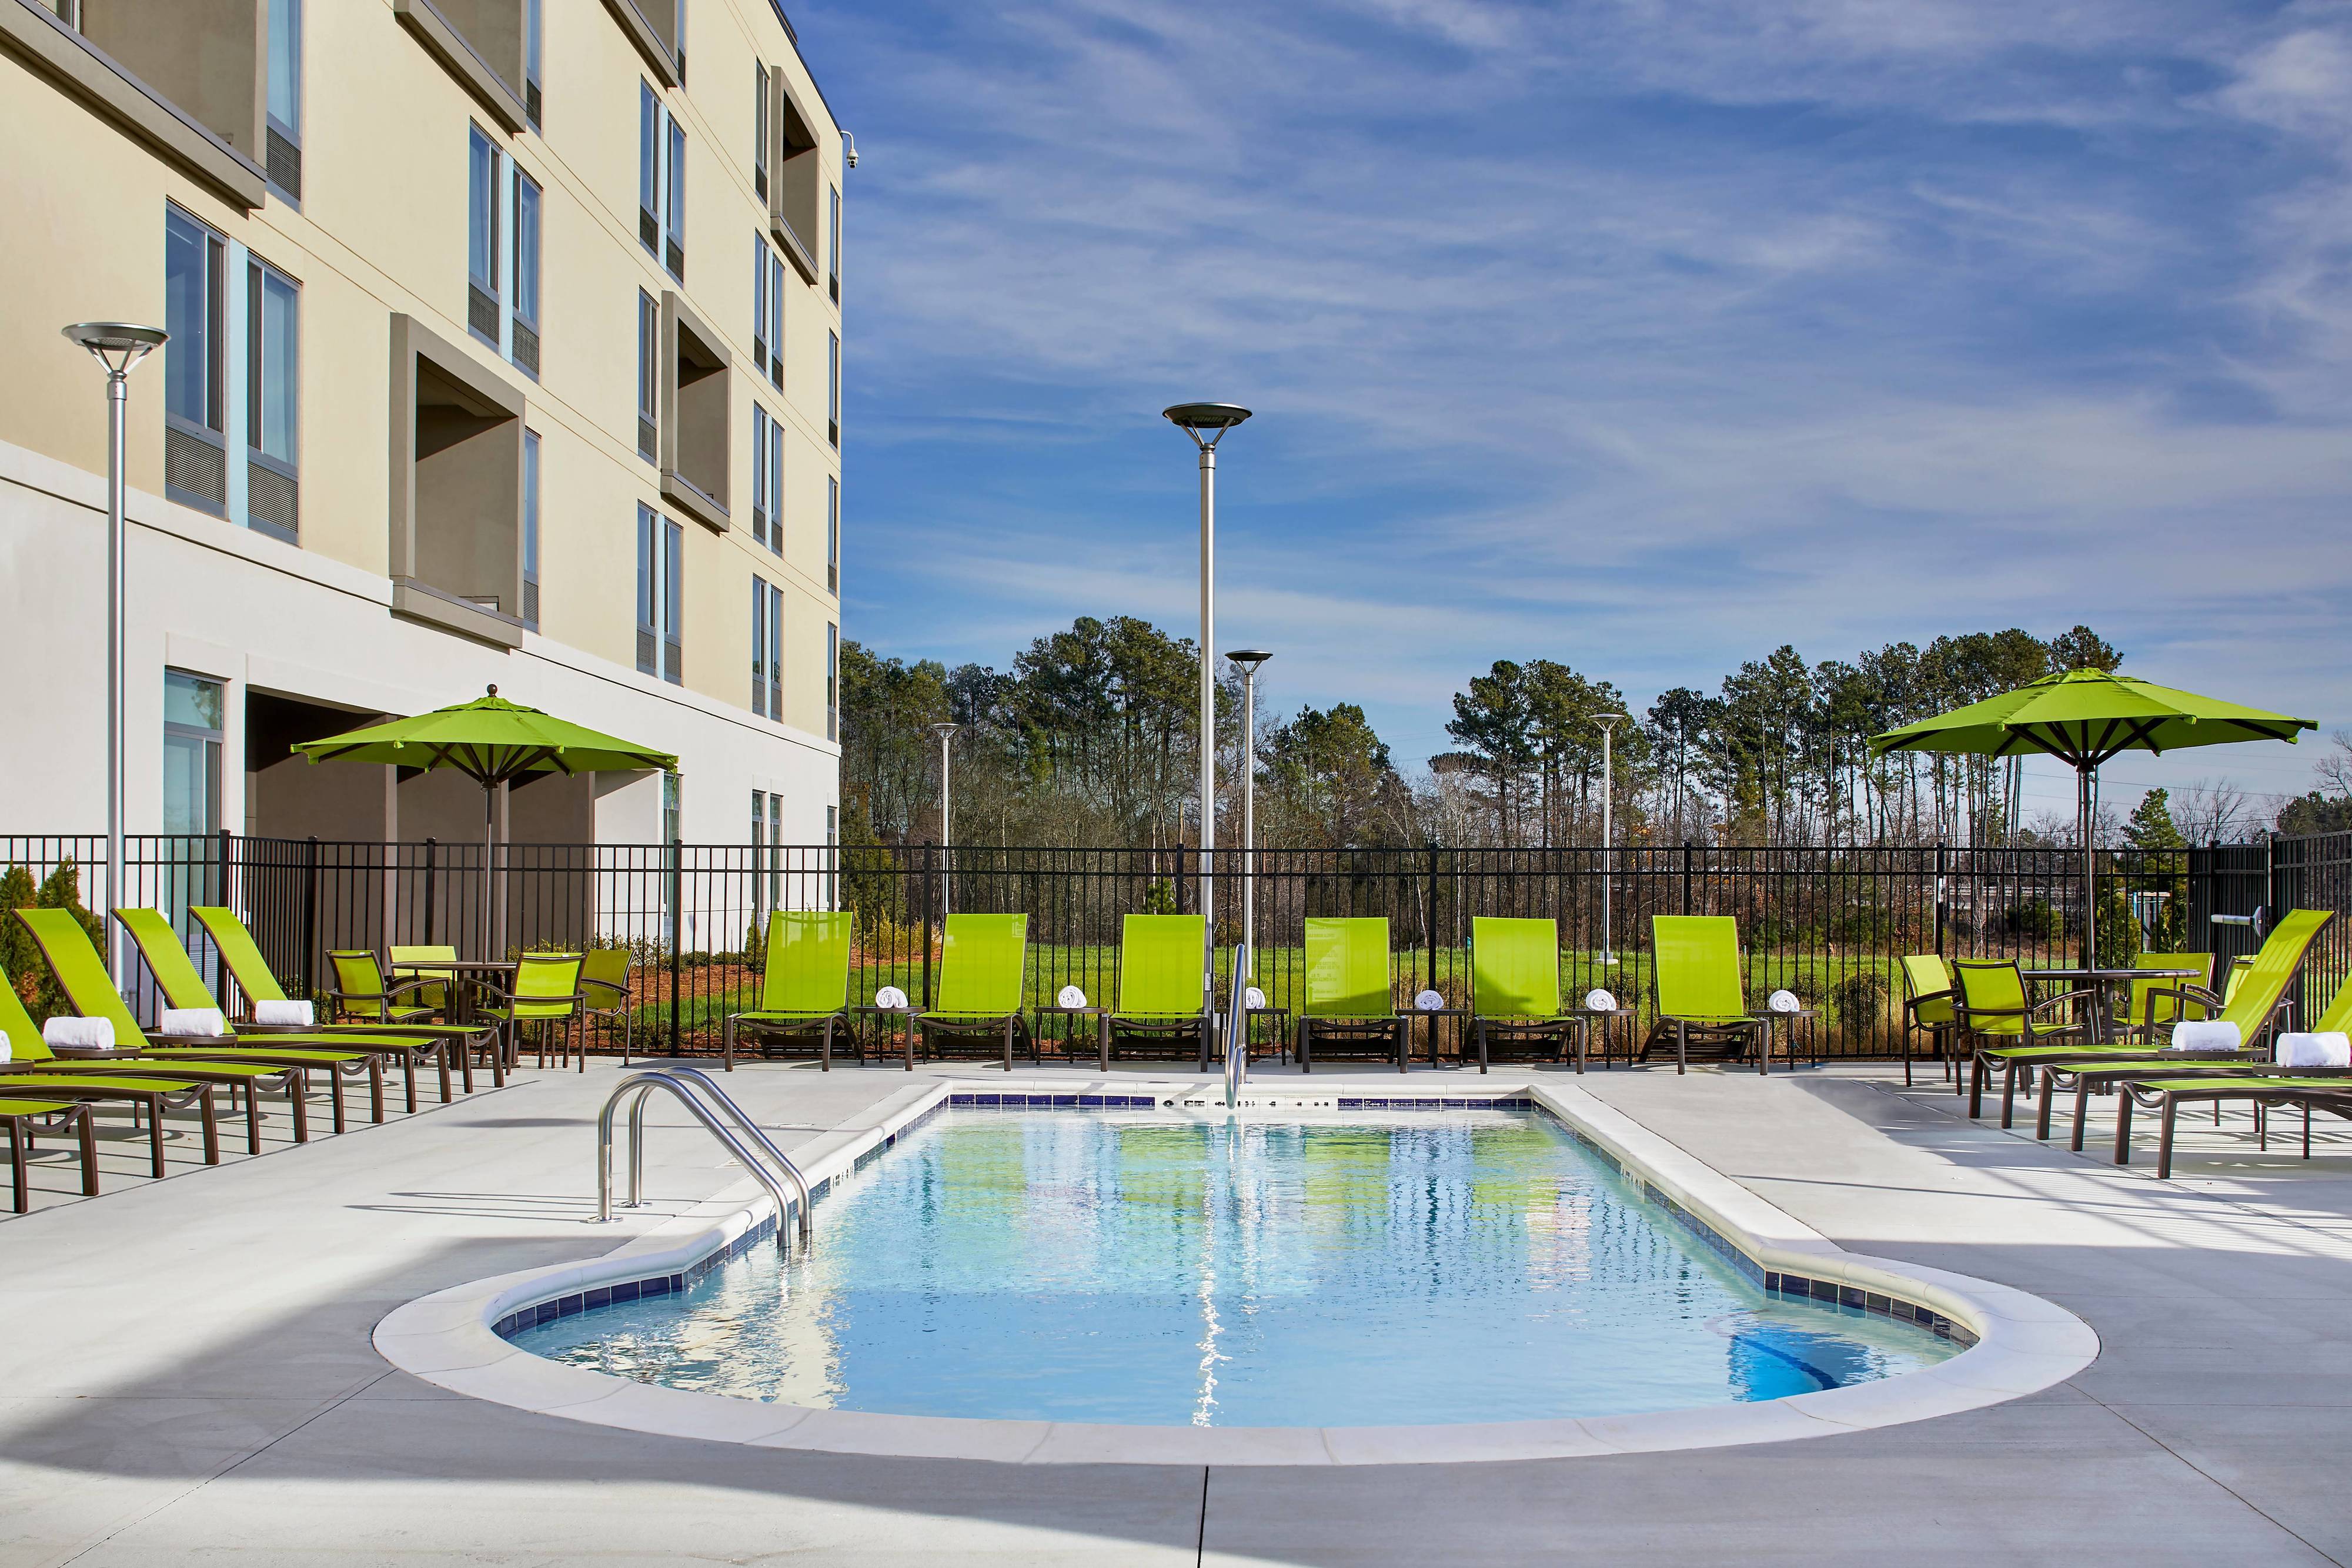 SpringHill Suites by Marriott Charlotte at Carowinds